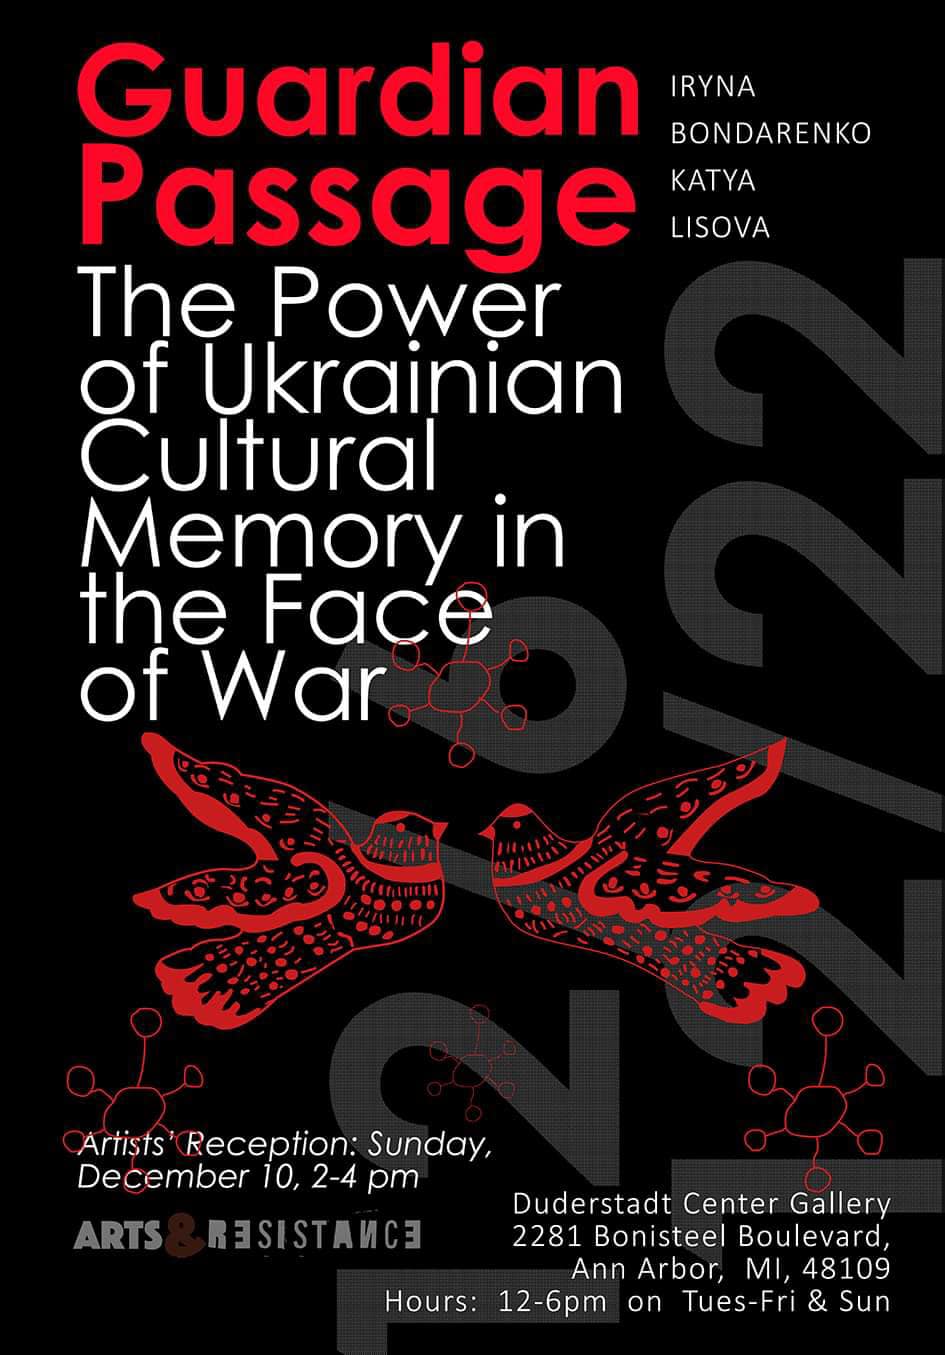 Guardian Passage. The Power of Ukrainian Cultural Memory in the Face of War